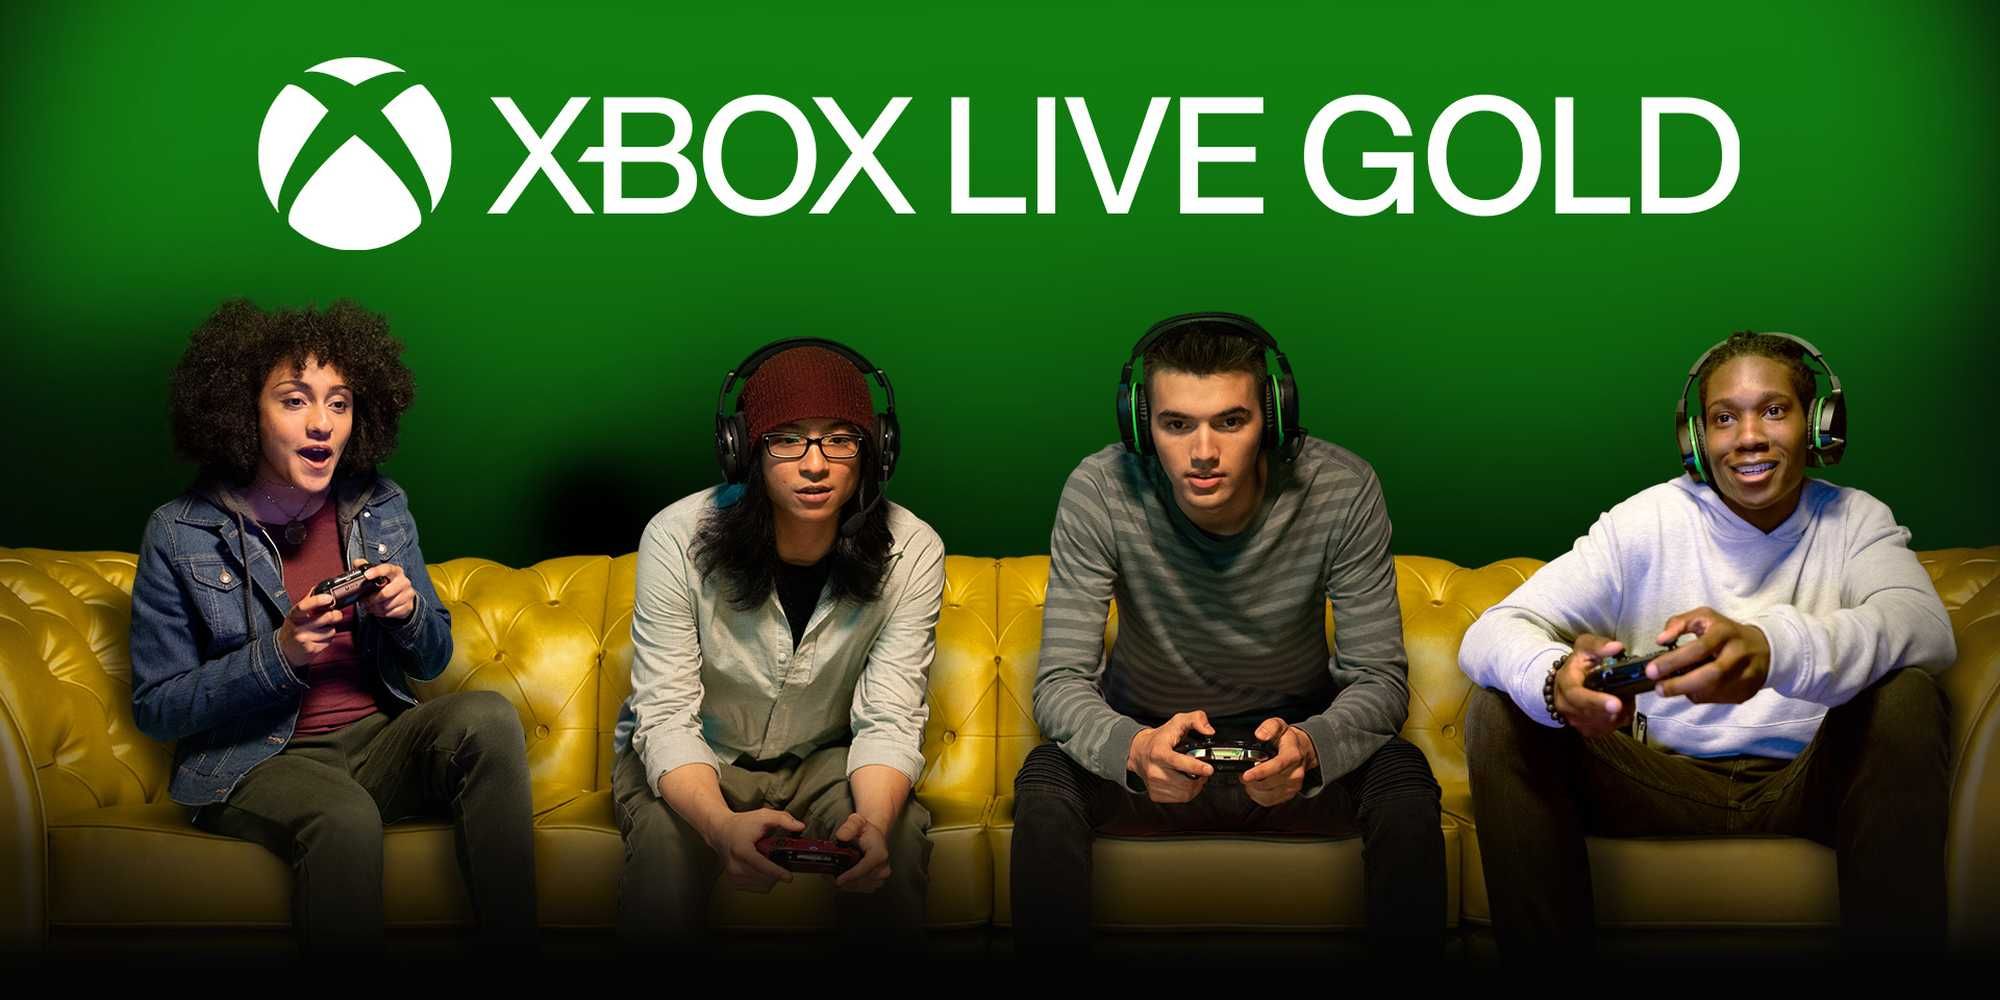 How To Subscribe To Xbox Live Gold